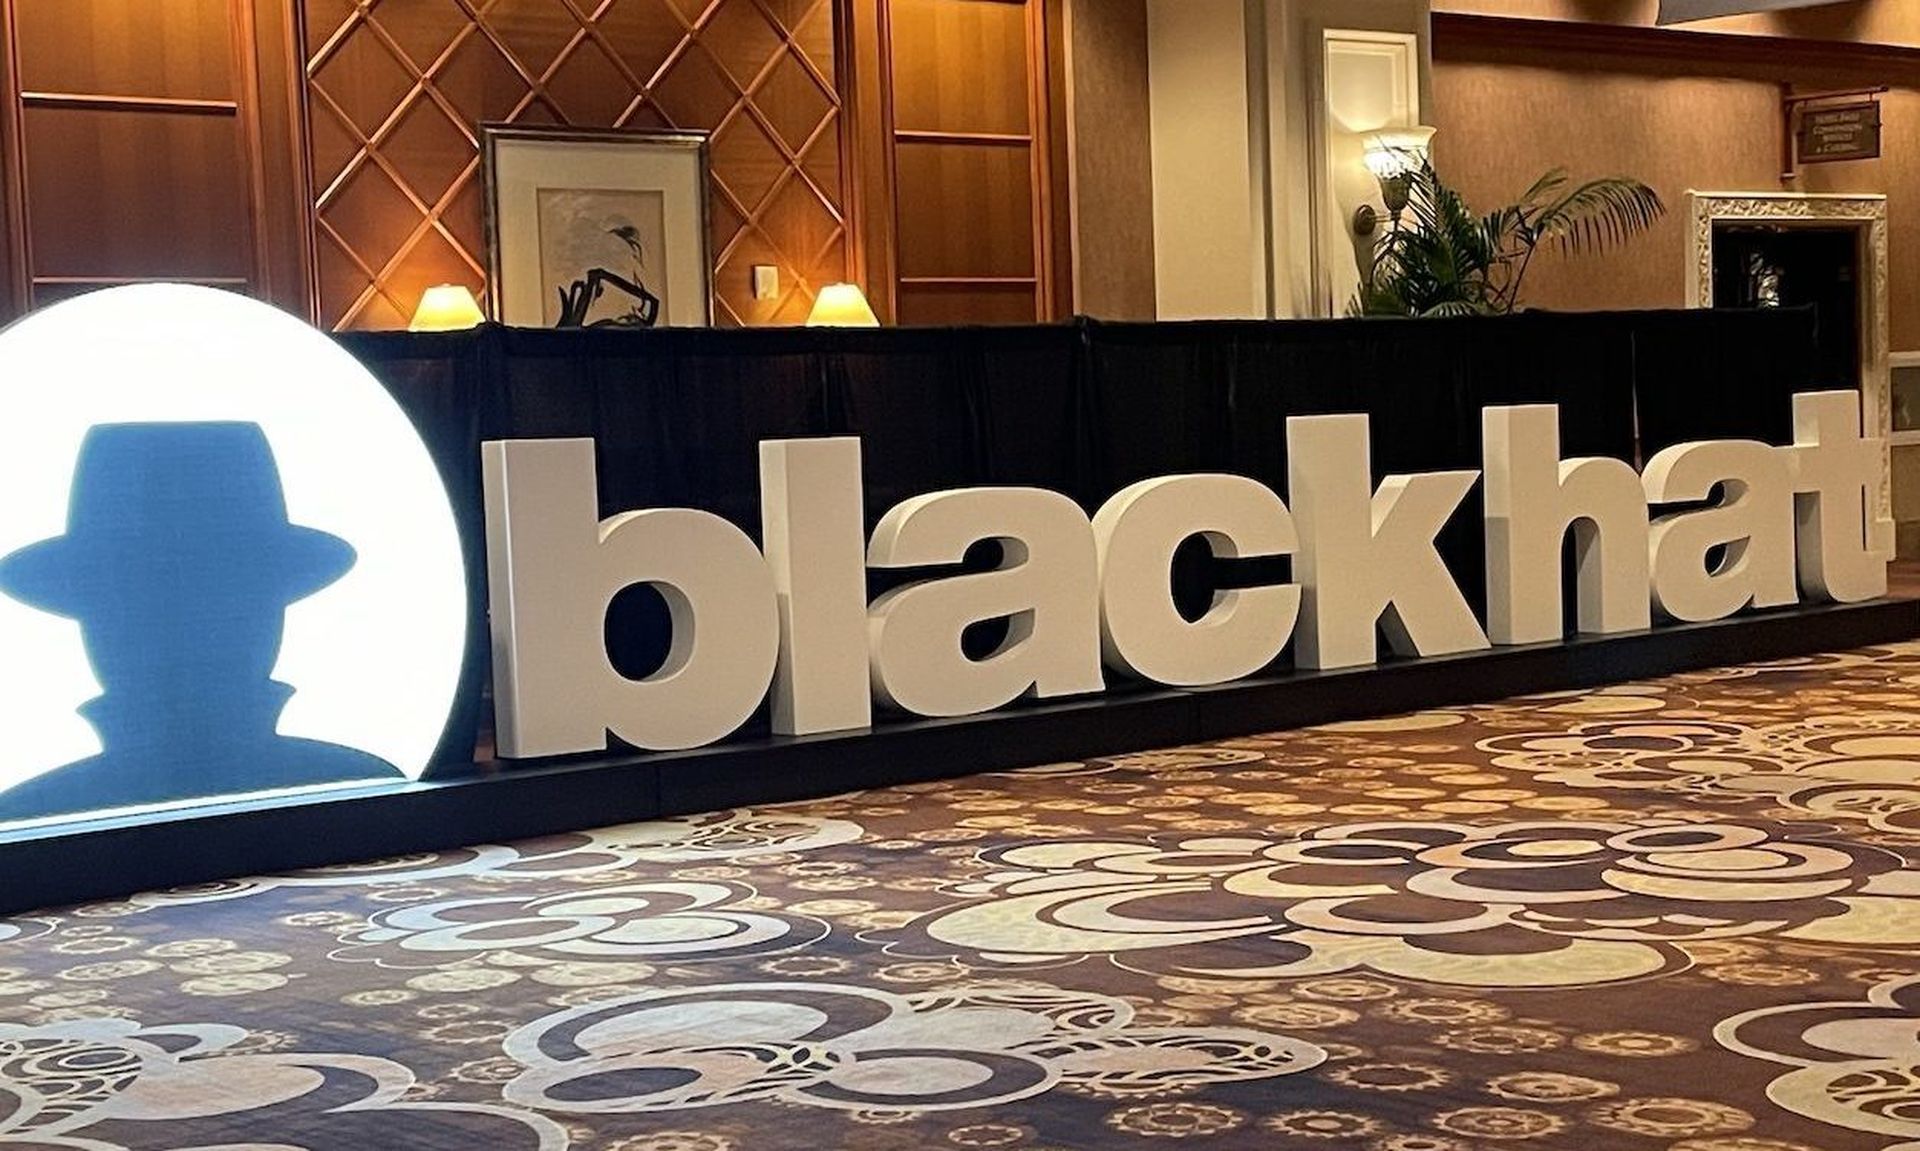 Signage adorns the Mandalay Bay conference center in Las Vegas before general sessions kickoff for the Black Hat USA conference. (Staff/Jill Aitoro)